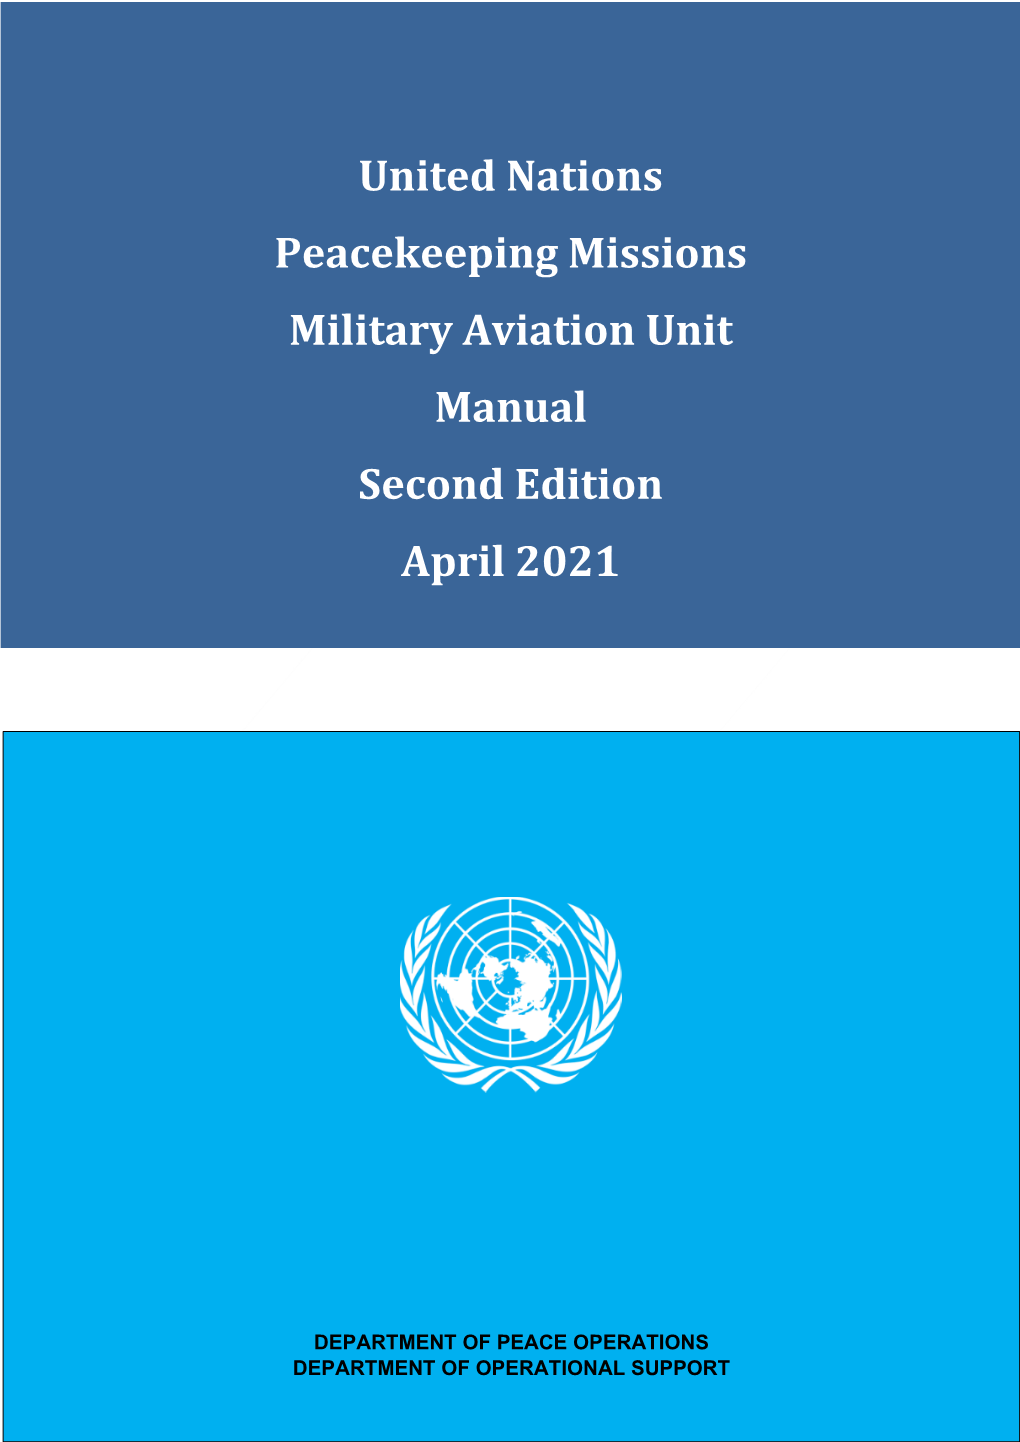 United Nations Peacekeeping Missions Military Aviation Unit Manual Second Edition April 2021